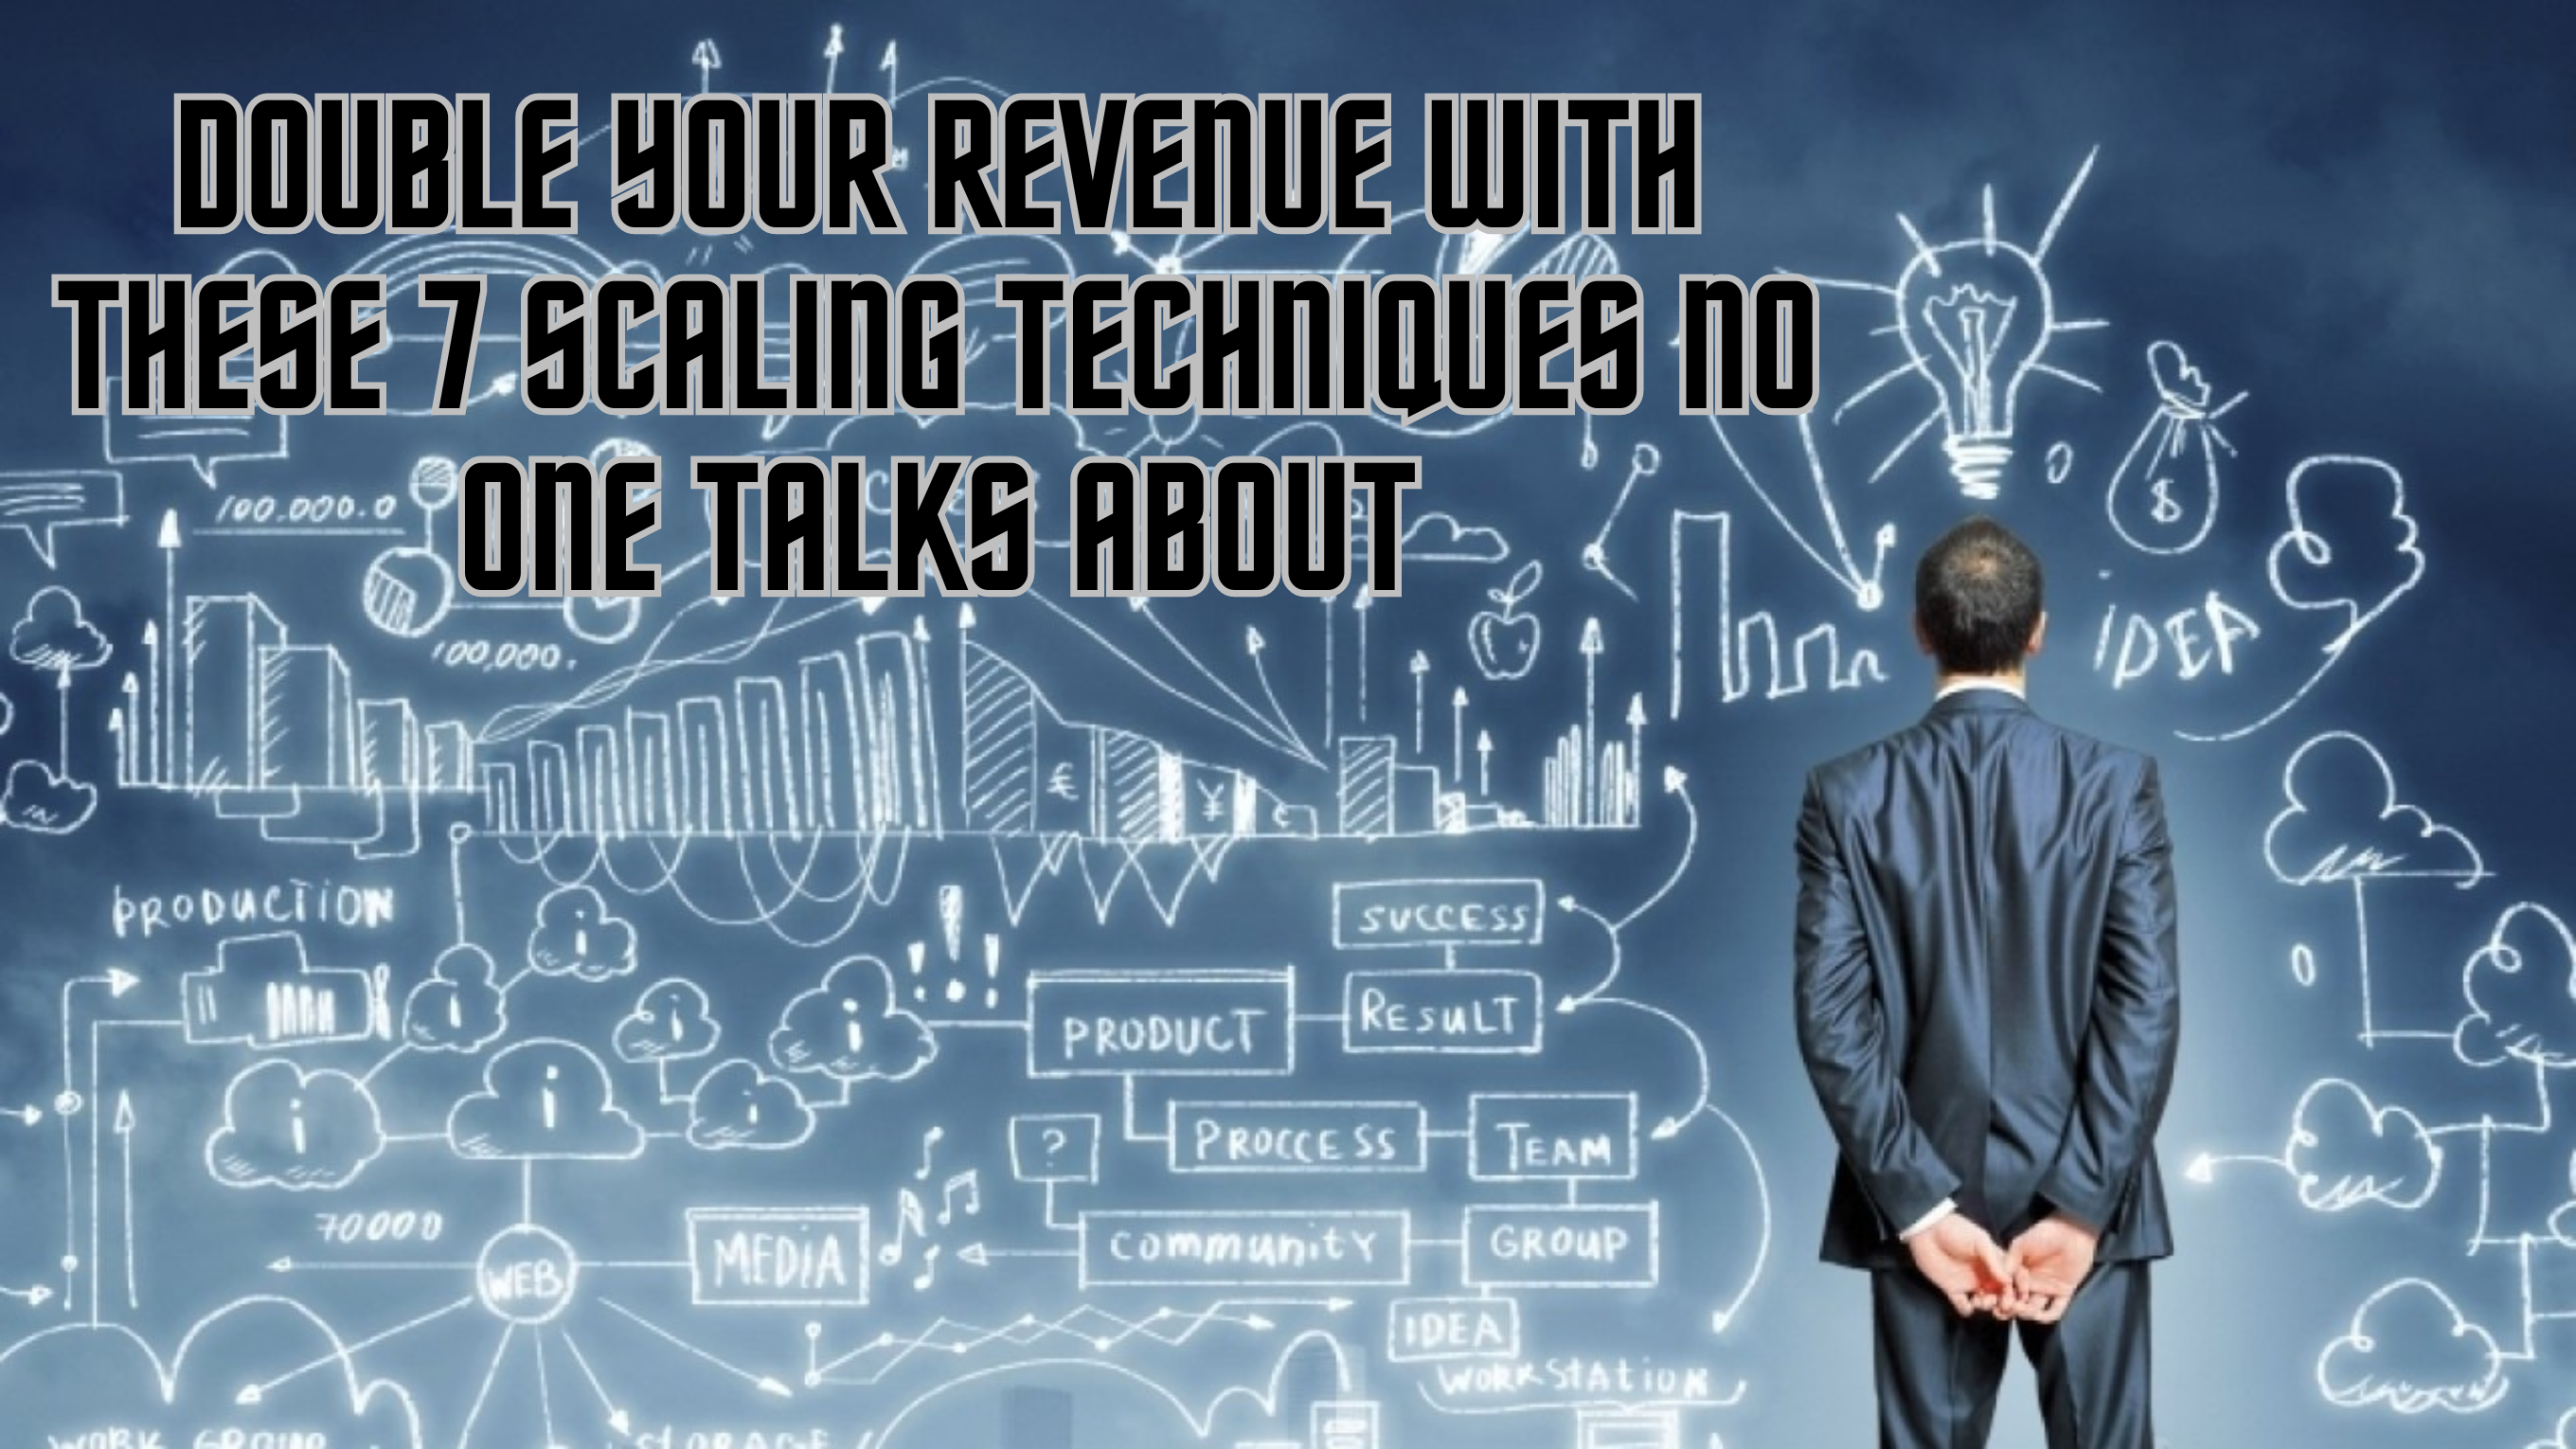 Strategic Planning Session for Revenue Growth with Scaling Techniques